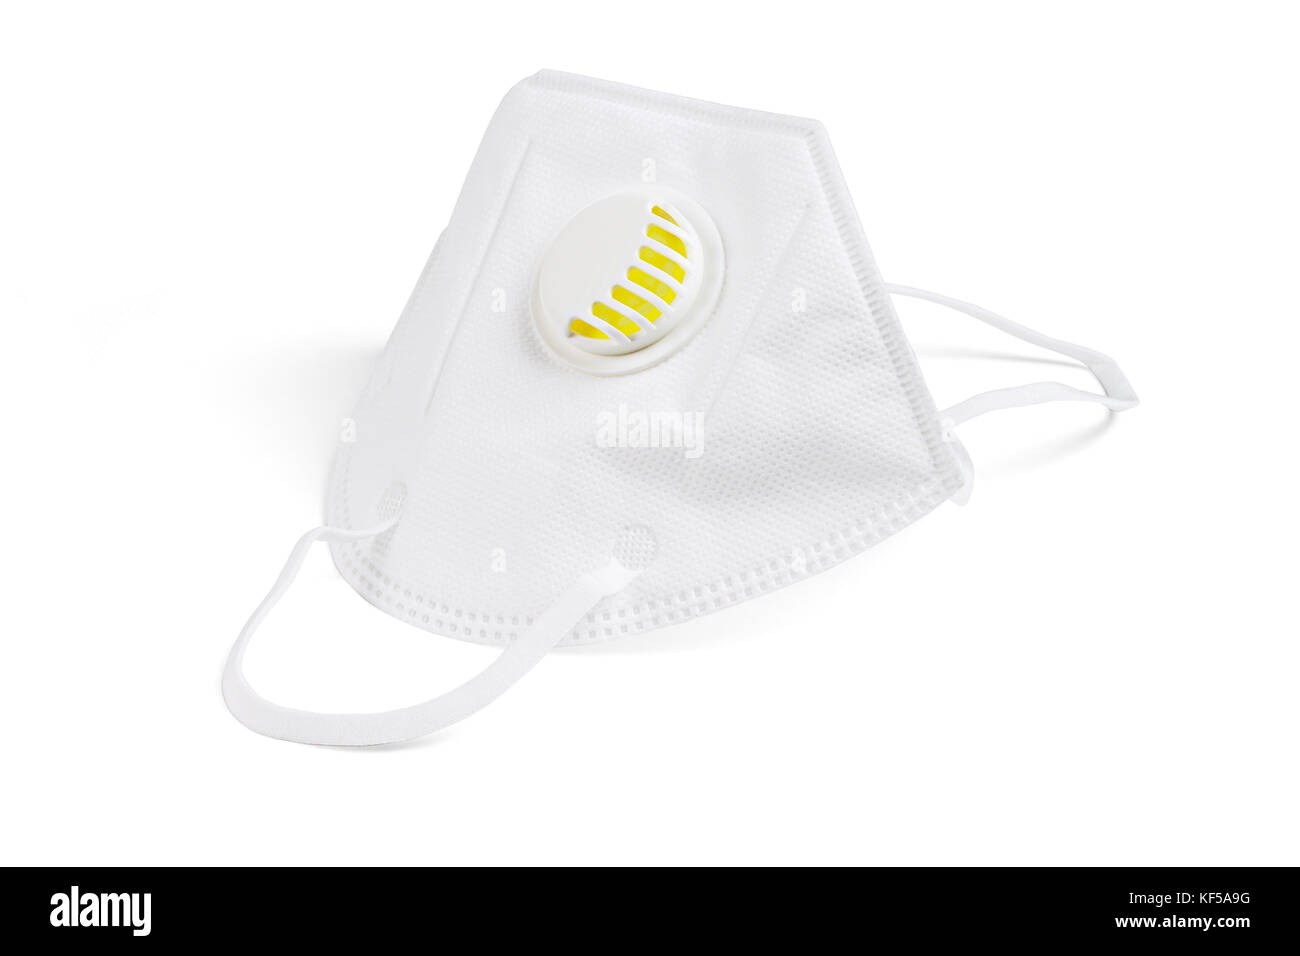 Disposable Safety Dust Face Mask on White Background Stock Photo